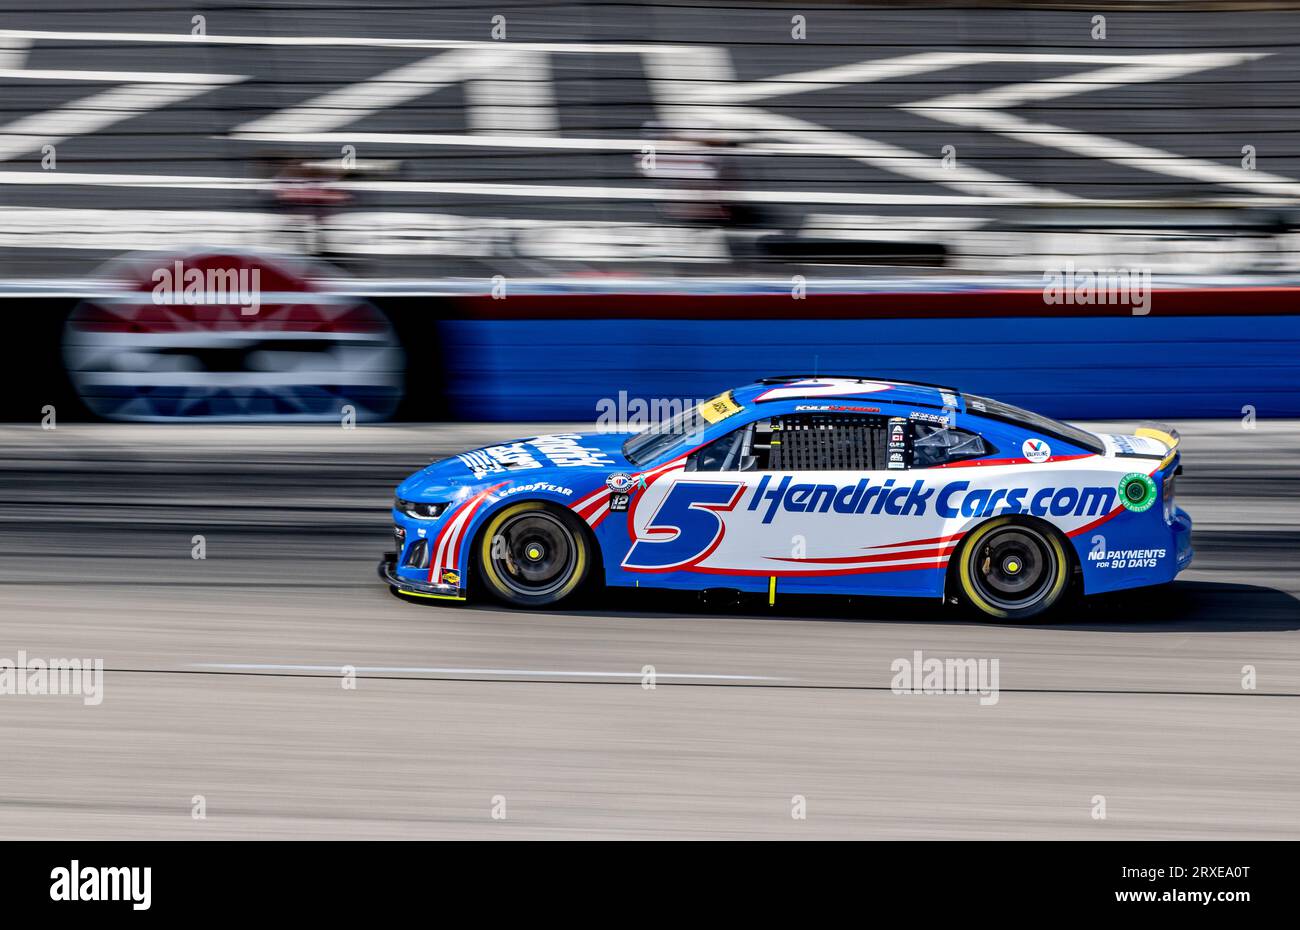 Fort Worth, Texas - September 24rd, 2023: Kyle Larson, driver of the #5  Valvoline Chevrolet, competing in the NASCAR Autotrader EchoPark Automotive 400 at Texas Motor Speedway. Credit: Nick Paruch/Alamy Live News Stock Photo